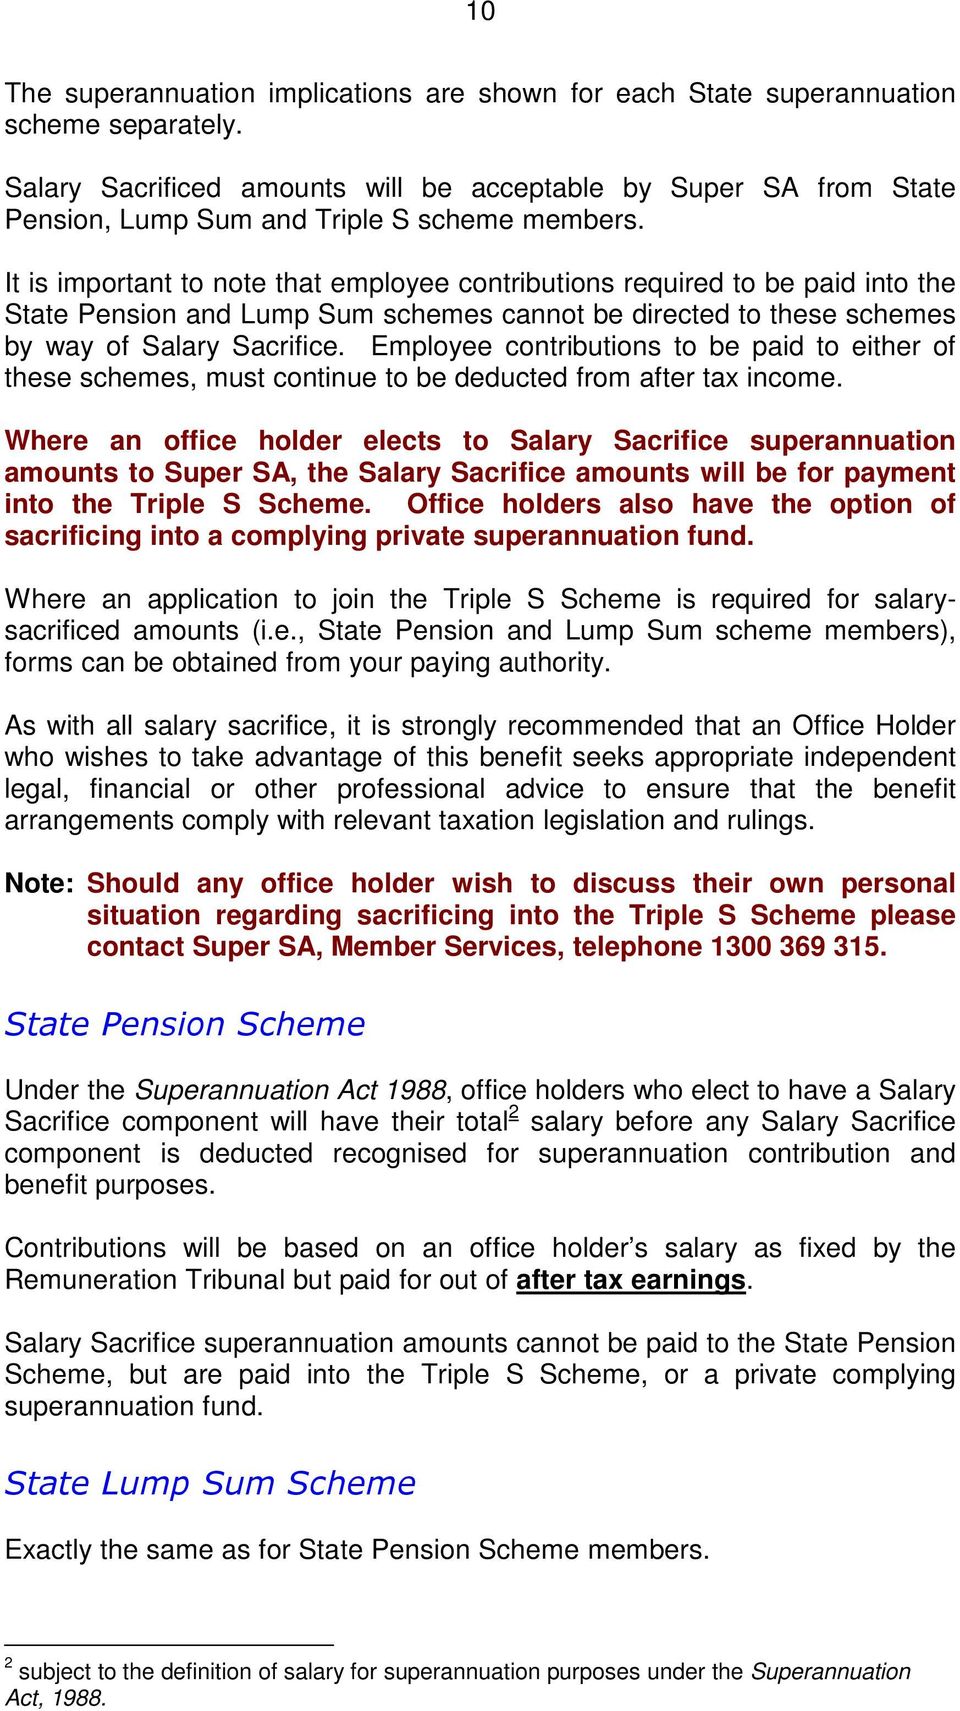 It is important to note that employee contributions required to be paid into the State Pension and Lump Sum schemes cannot be directed to these schemes by way of Salary Sacrifice.